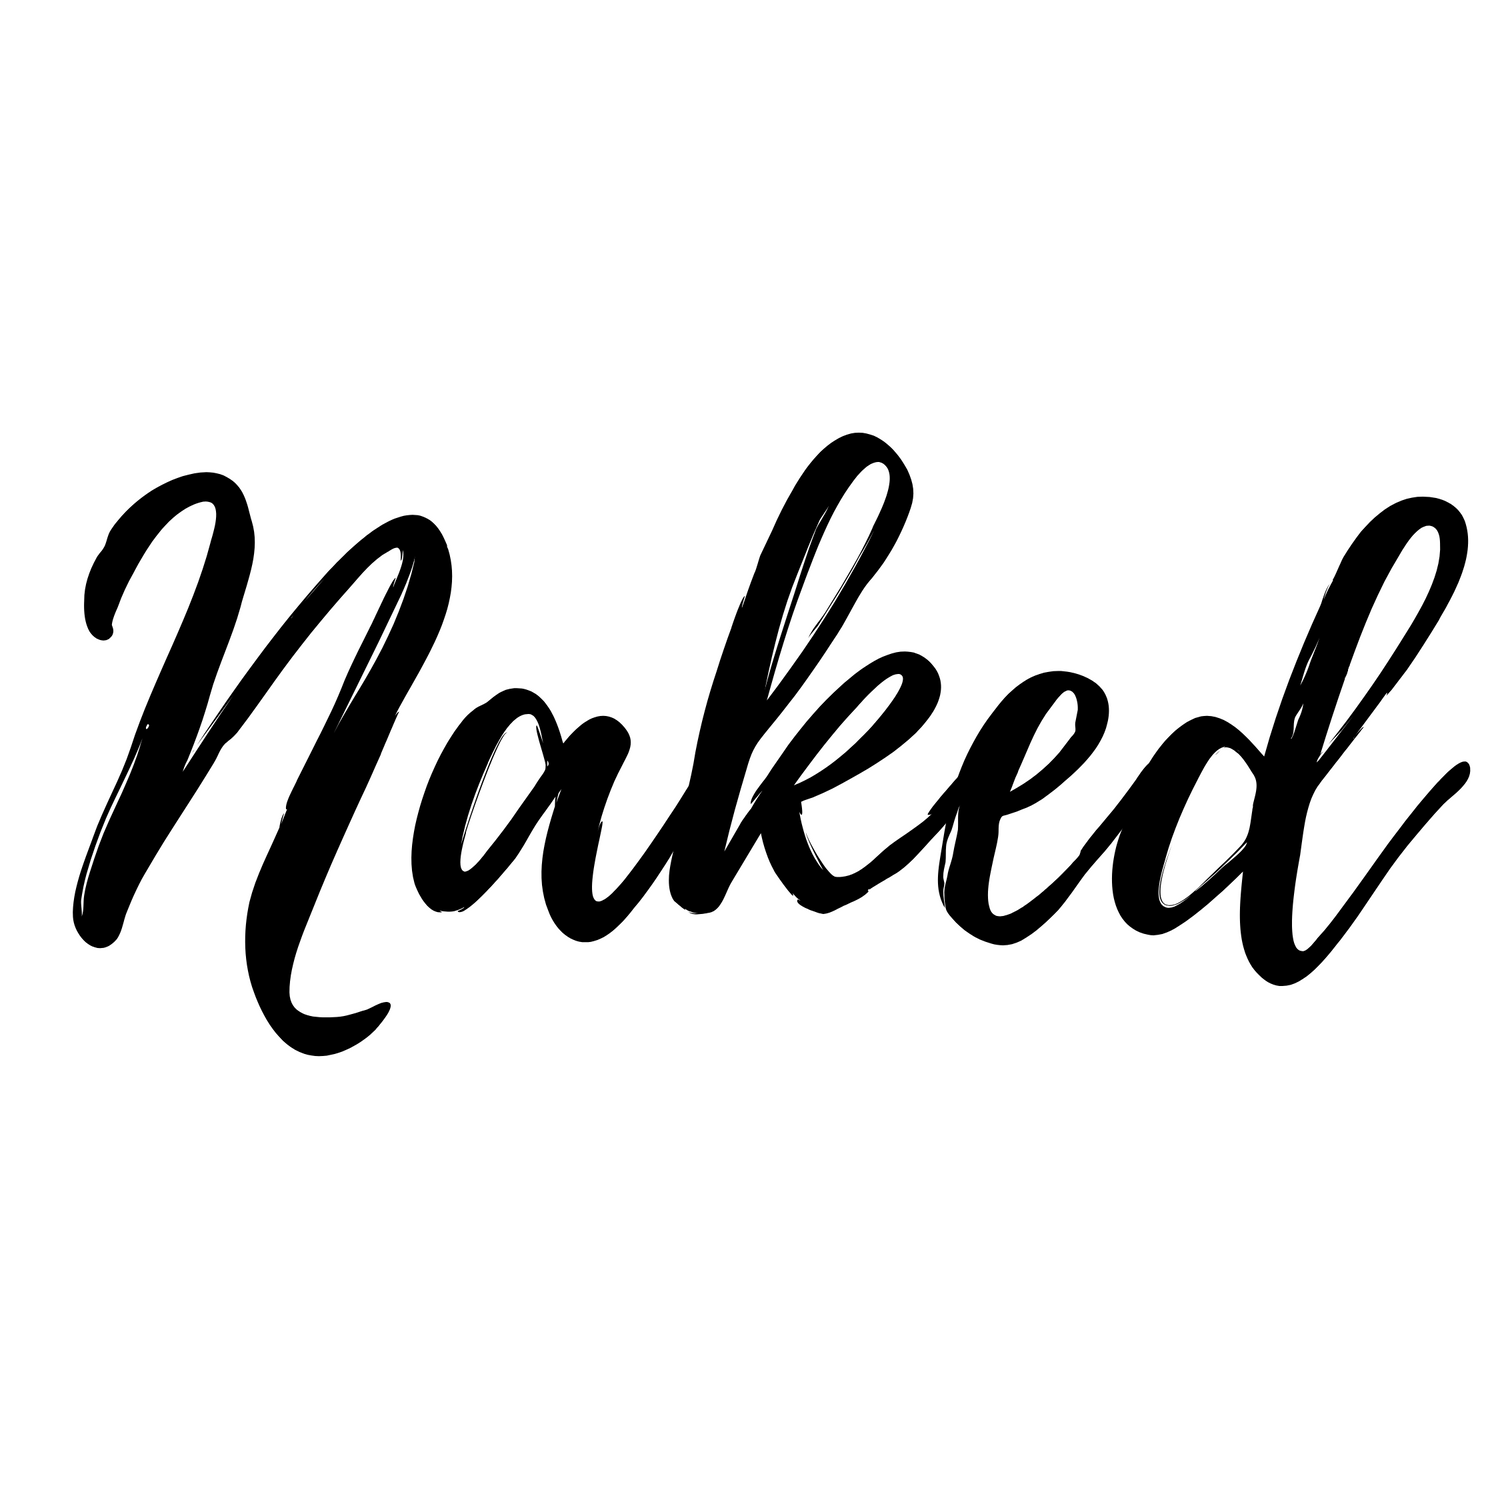 Naked Collection